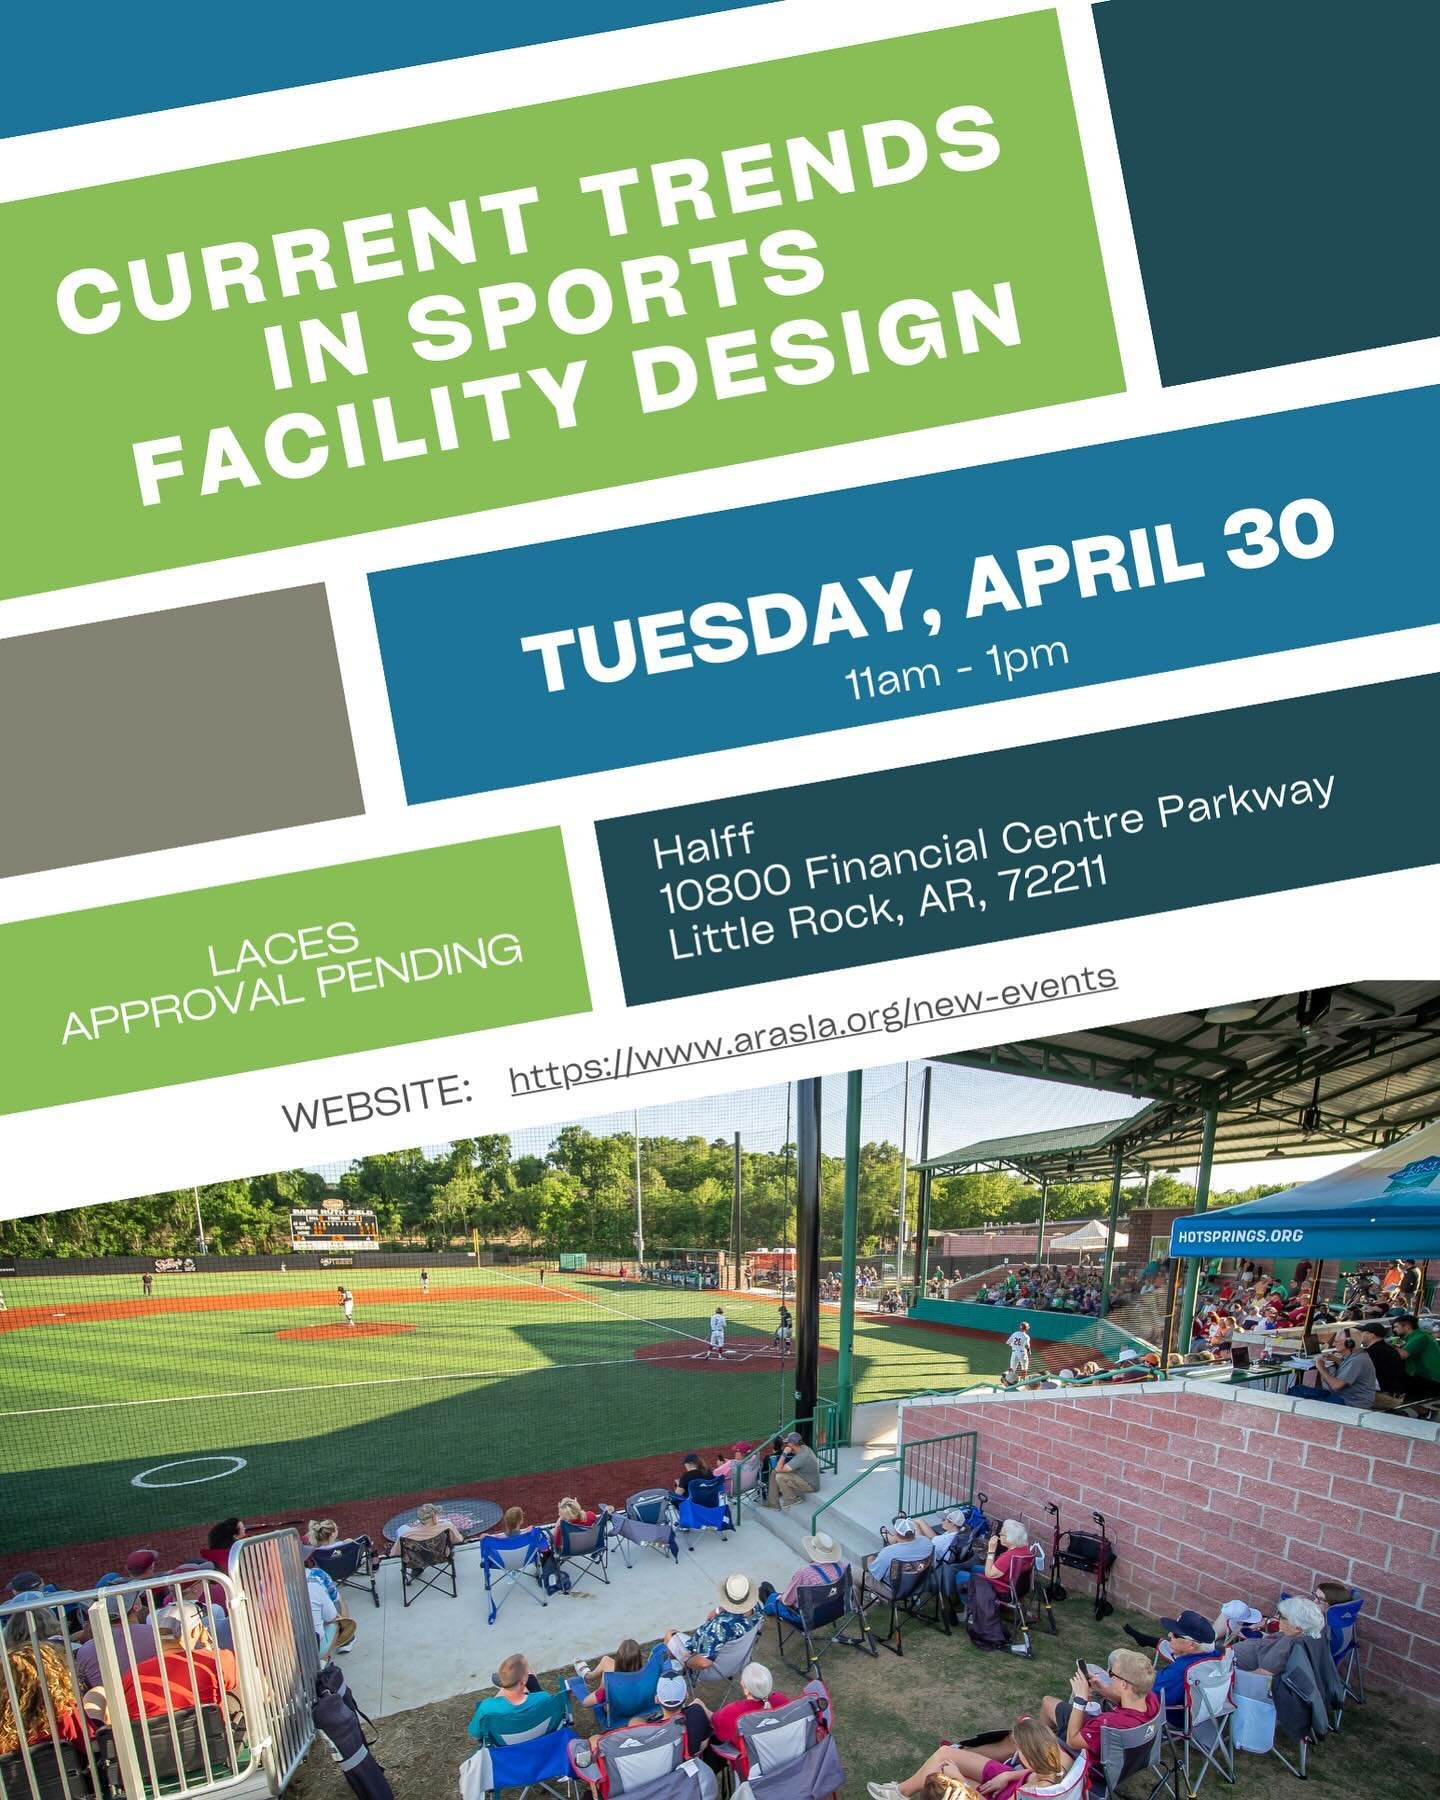 UPDATE: This course is now approved by LACES for 2 CEUs! Please join us for a course by Sally Horsey of Halff on Current Trends in Sports Facility Design! Lunch will be provided and LACES approval is pending for CEUs. Please register at the following